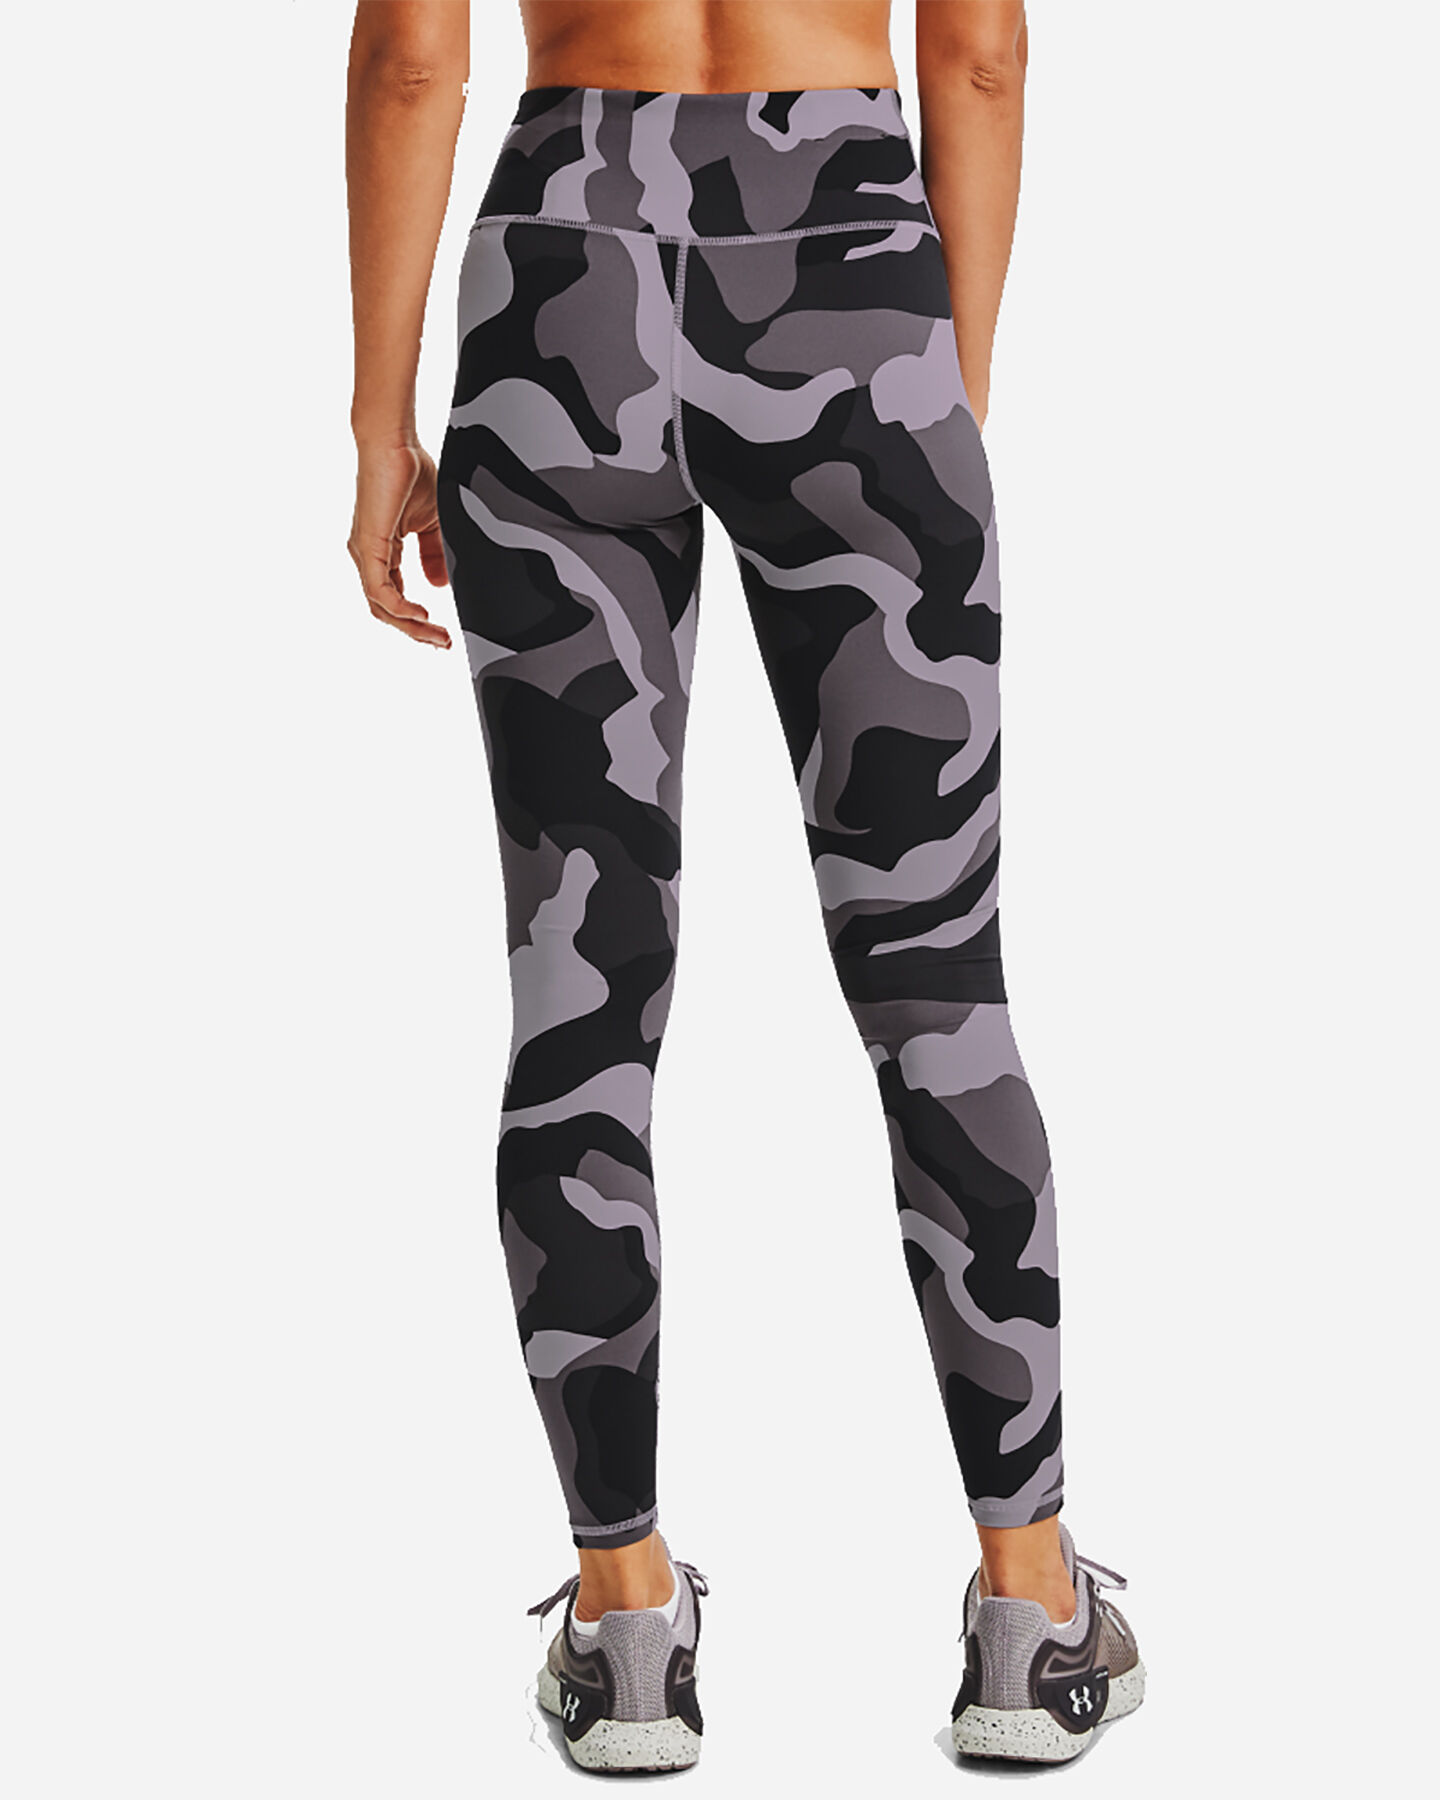  Leggings UNDER ARMOUR CAMOU RUSH W S5229989|0585|XS scatto 1